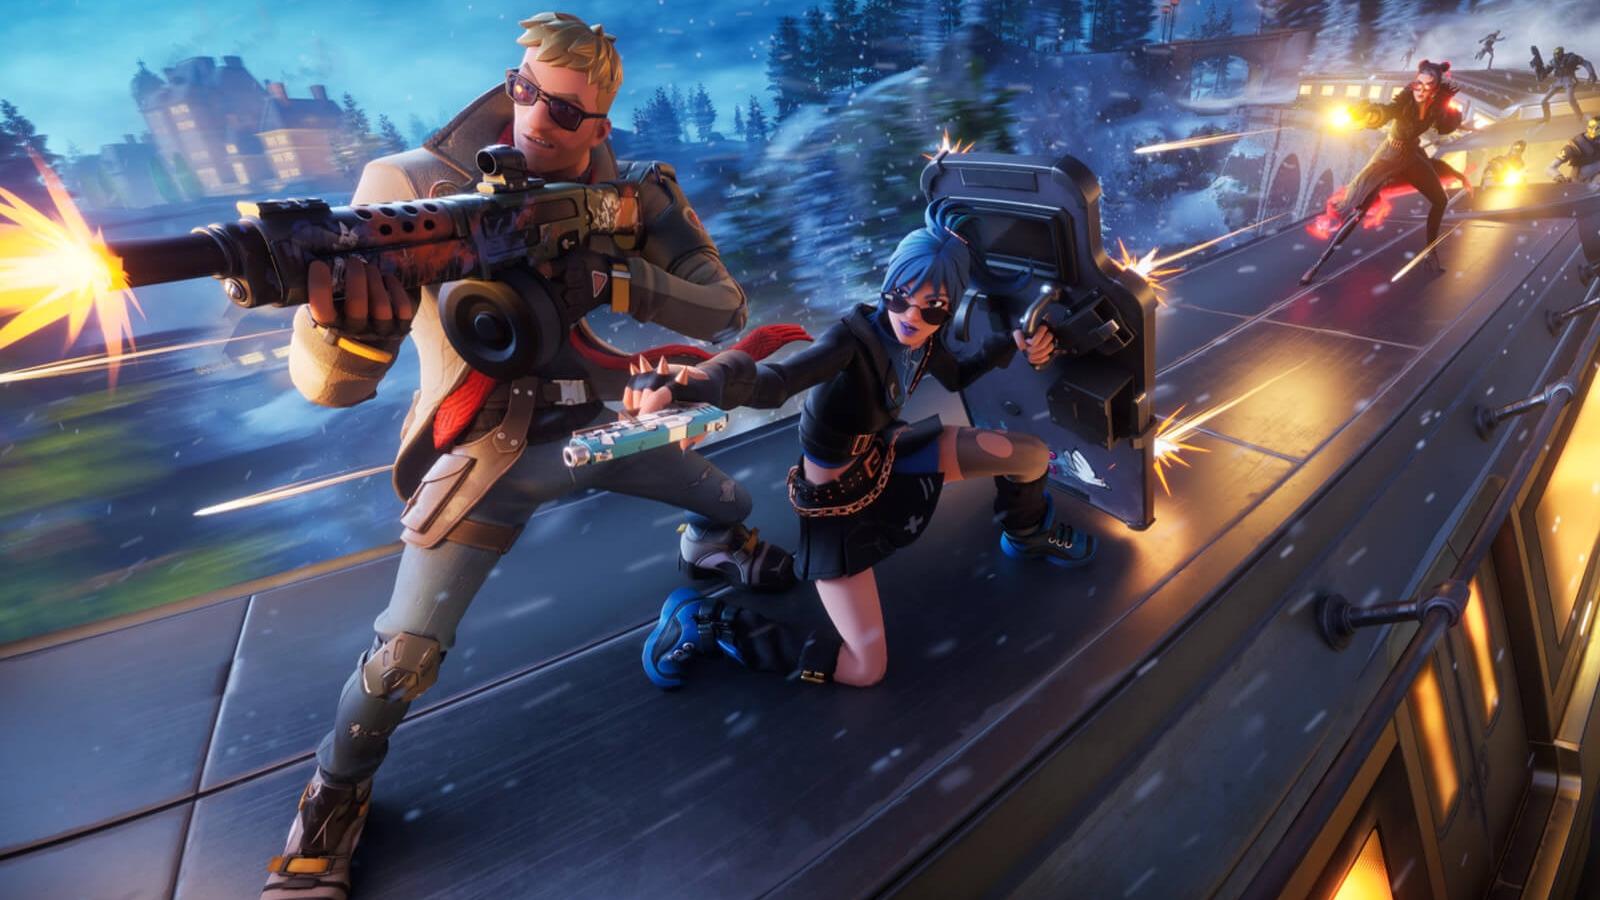 Discover Games and Experiences in Fortnite in an All-New Way